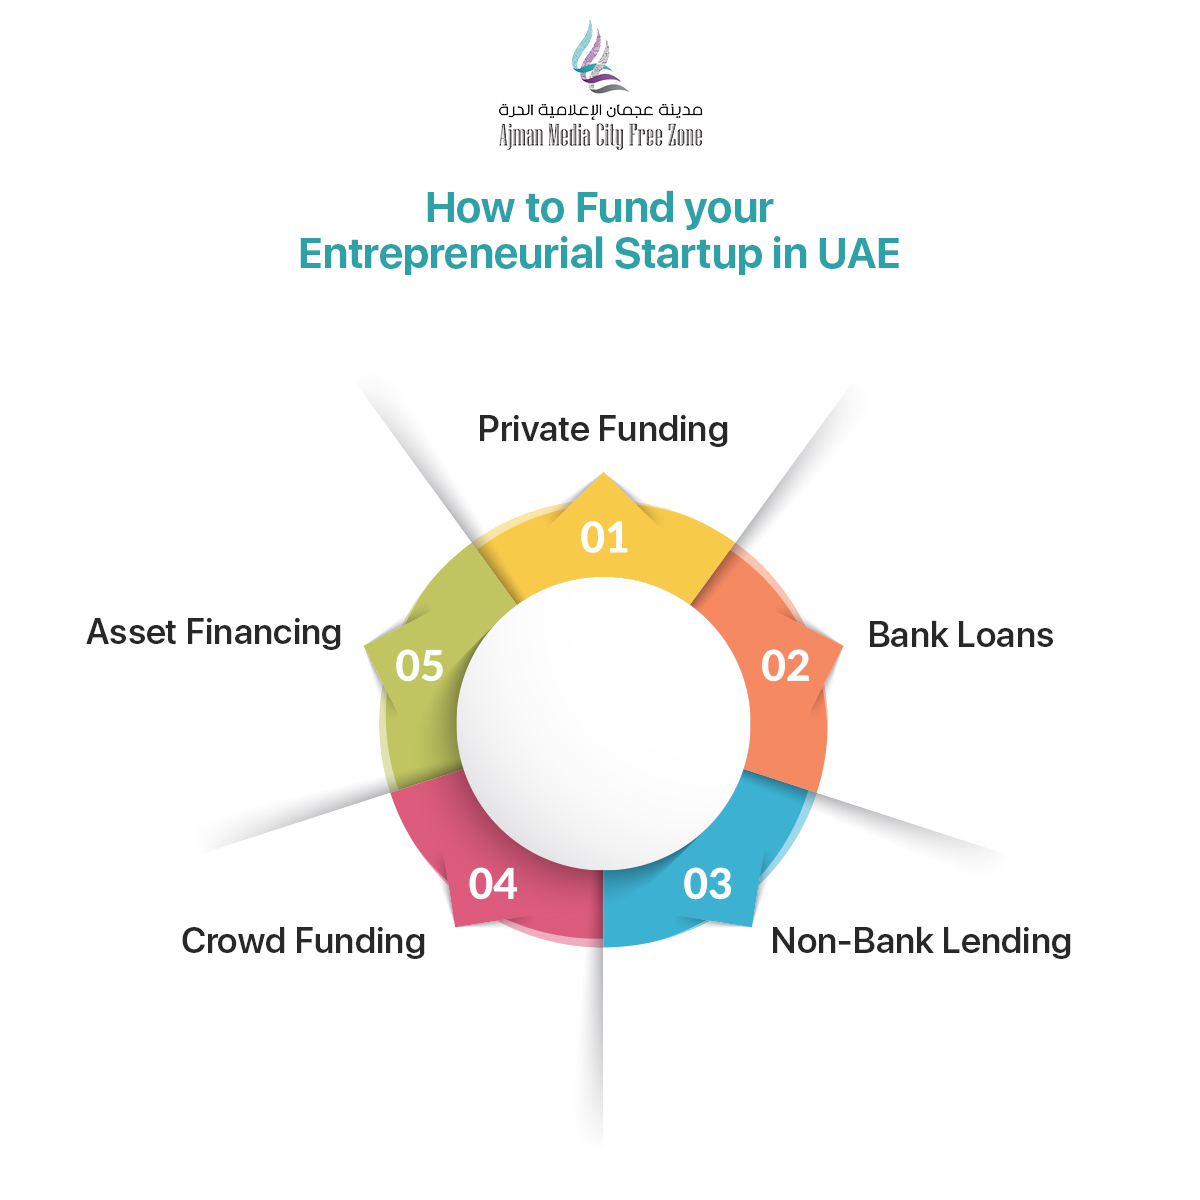 How to Fund your Entrepreneurial Startup in UAE